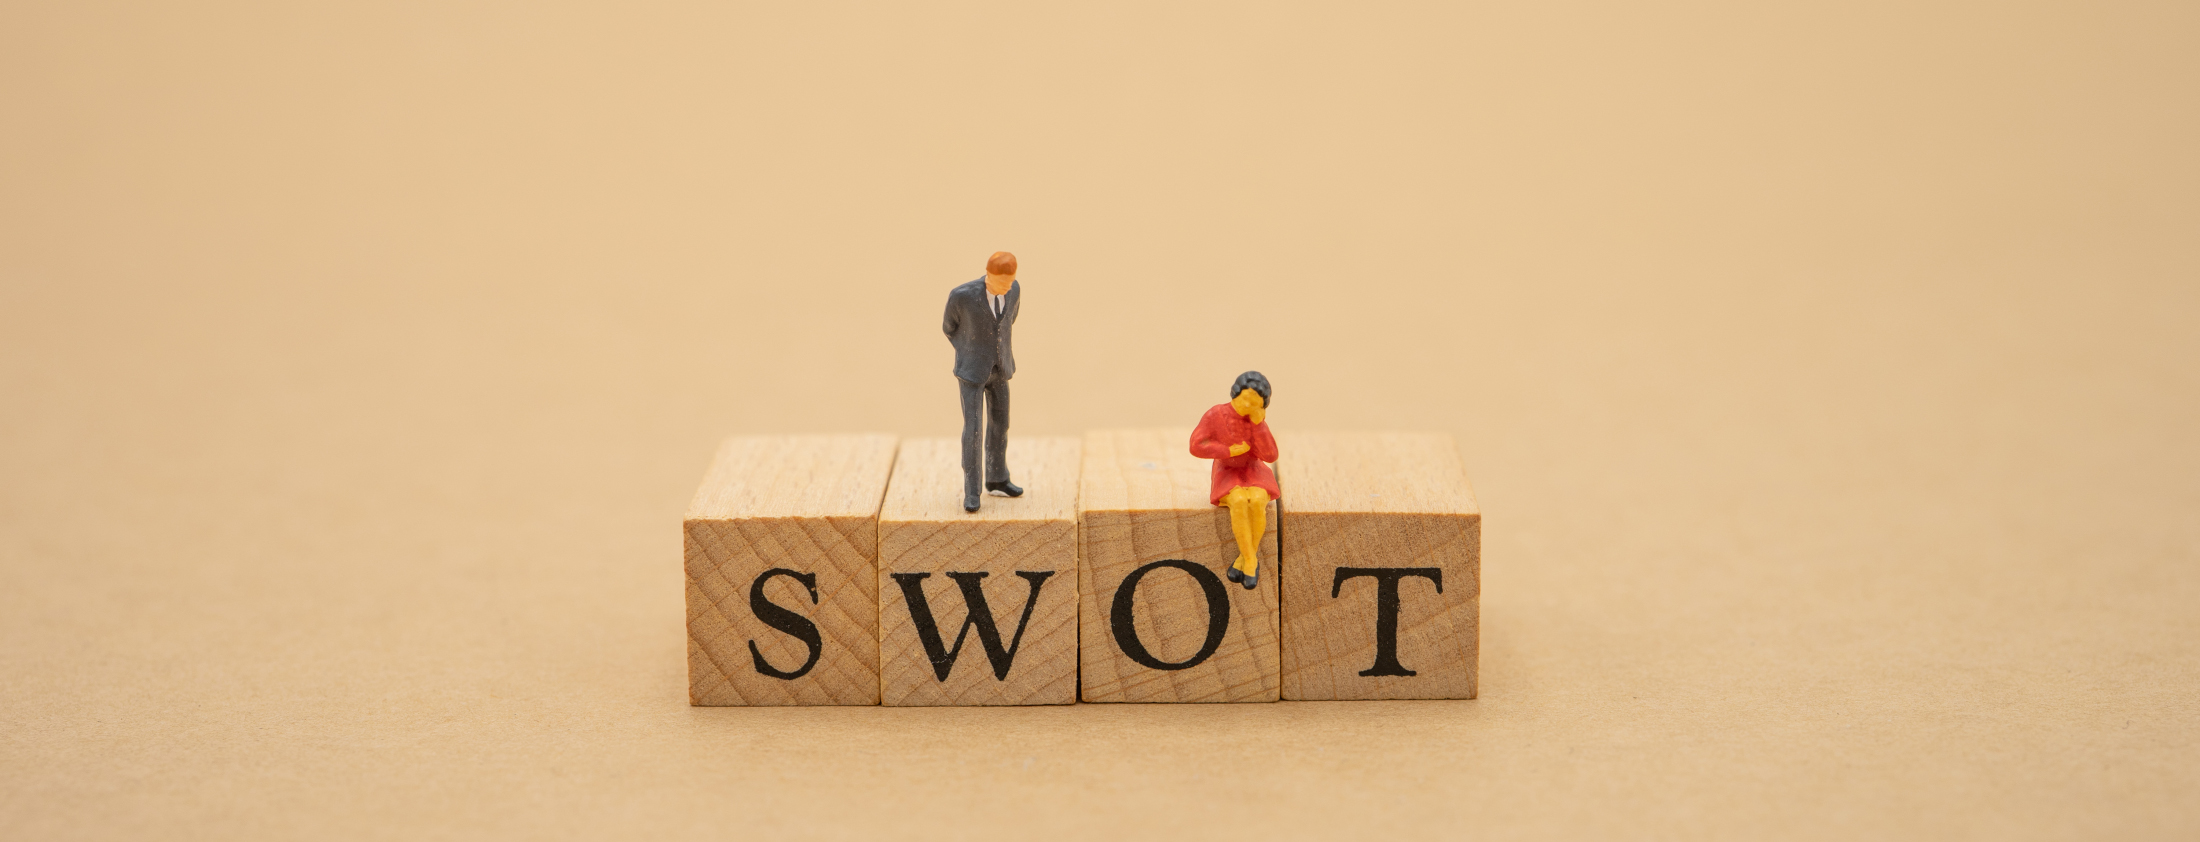 SWOT Analysis on Clusters and Industry 4.0